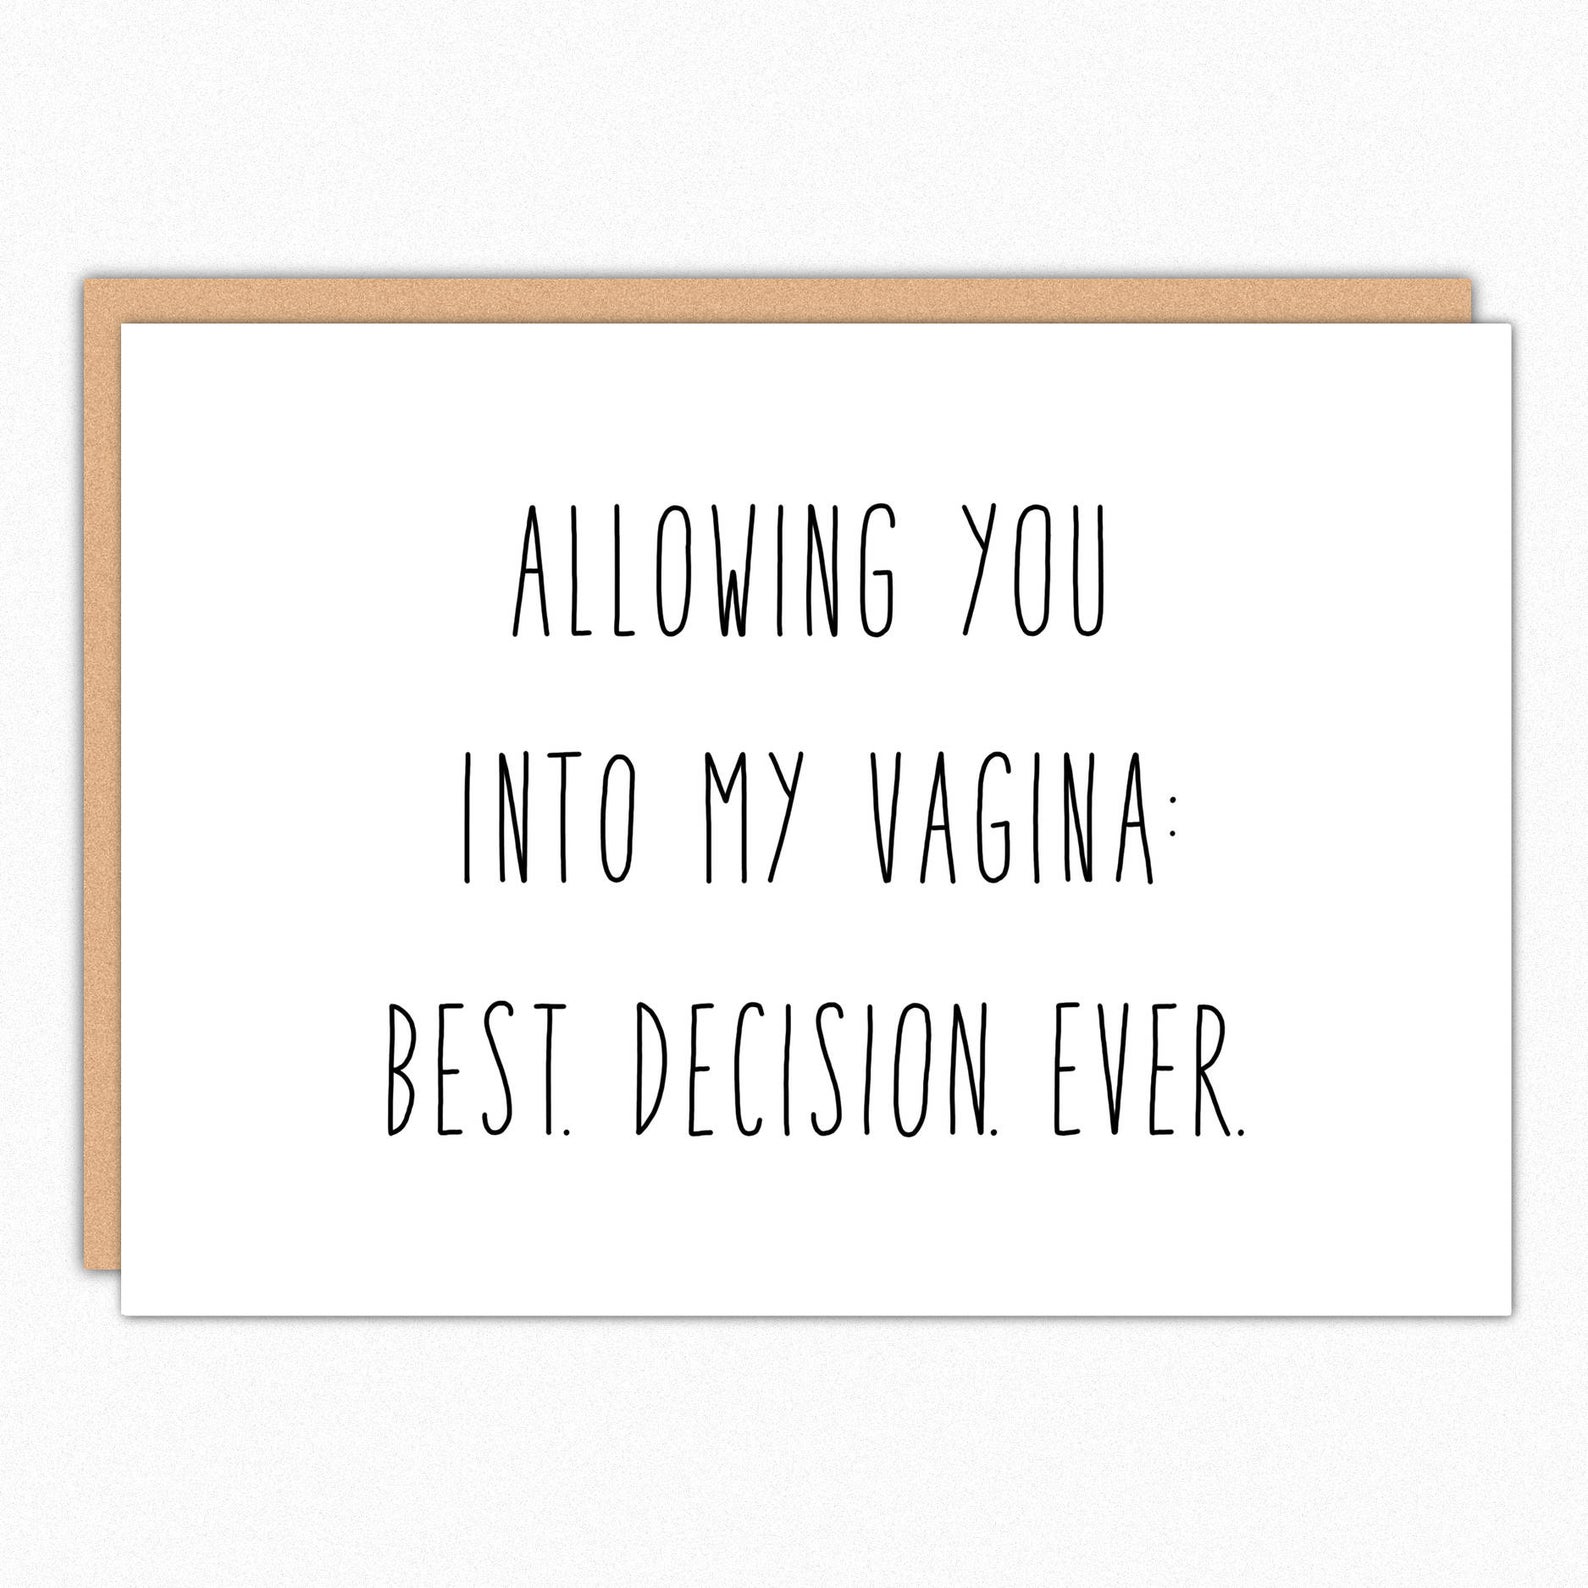 Funny Father's Day cards | Best Decision Ever by In a Nutshell Studio